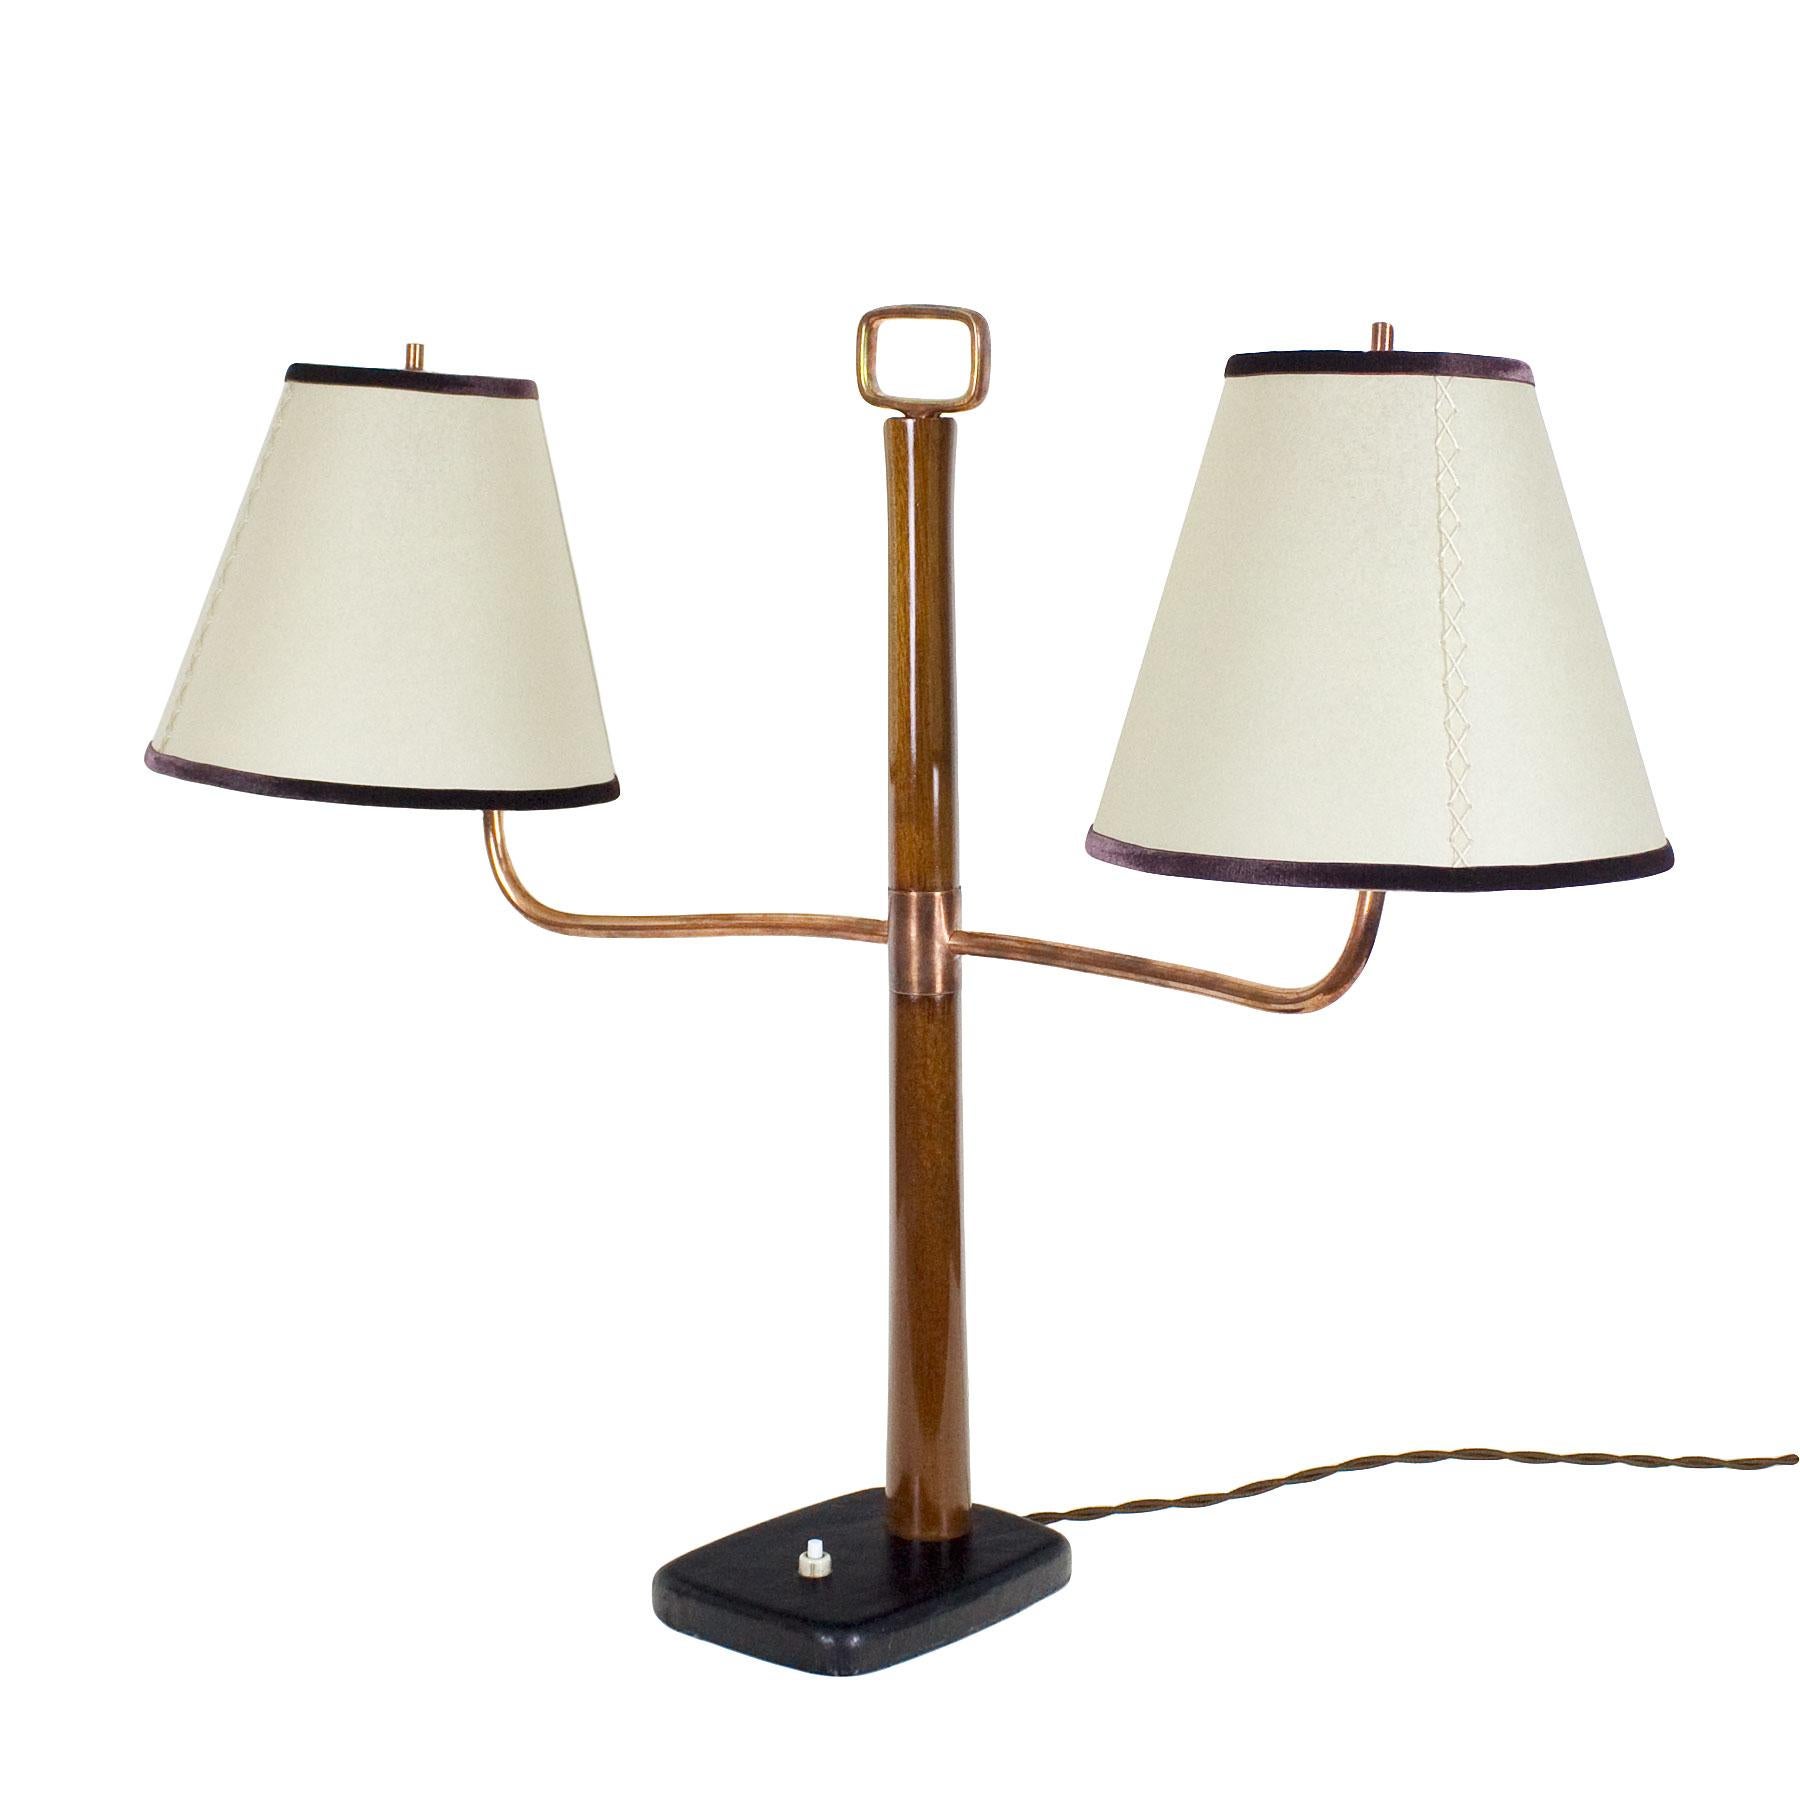 Art Deco library table lamp, solid mahogany, French polish, steel base covered with chocolate brown leather. Polished copper arms and handle, parchment and brown velvet lampshades.

Italy, circa 1930.